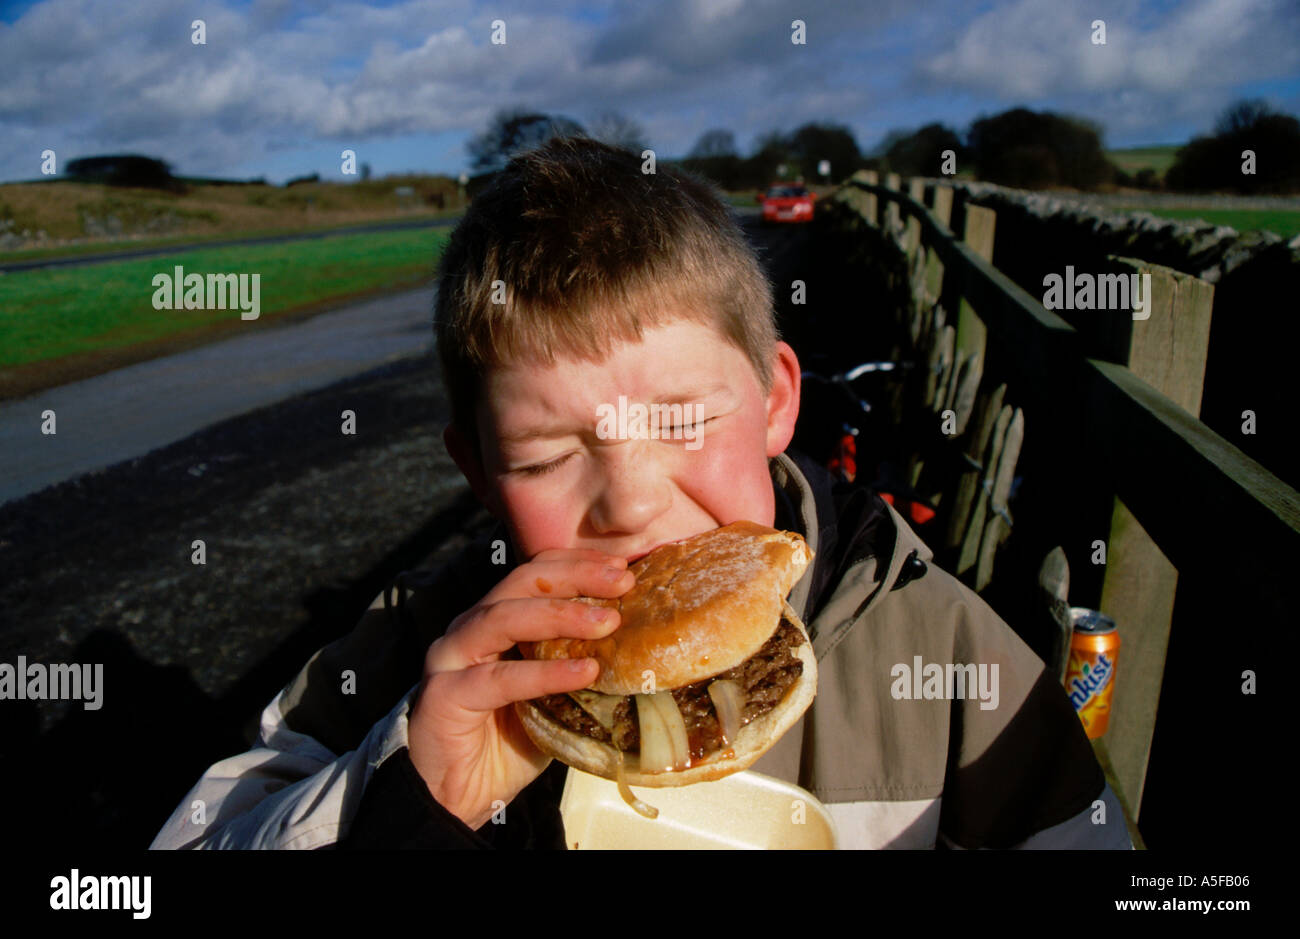 A Young Boy Eating Burger. Biting into a large burger illustrating childhood obesity through eating junk food. Stock Photo